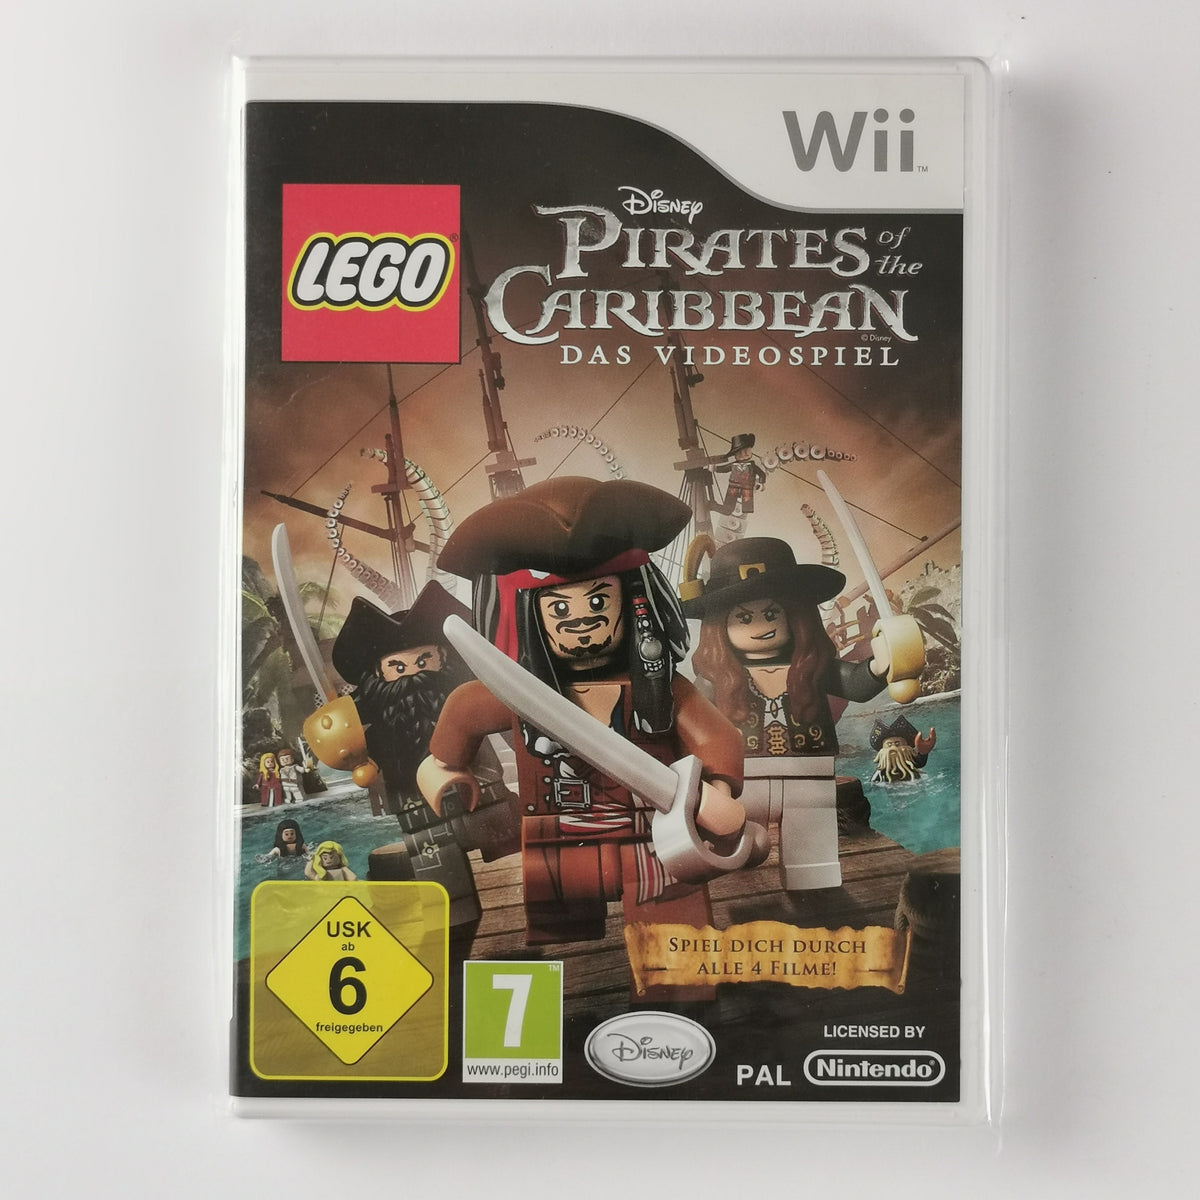 LEGO Pirates of the Caribbean [Wii]